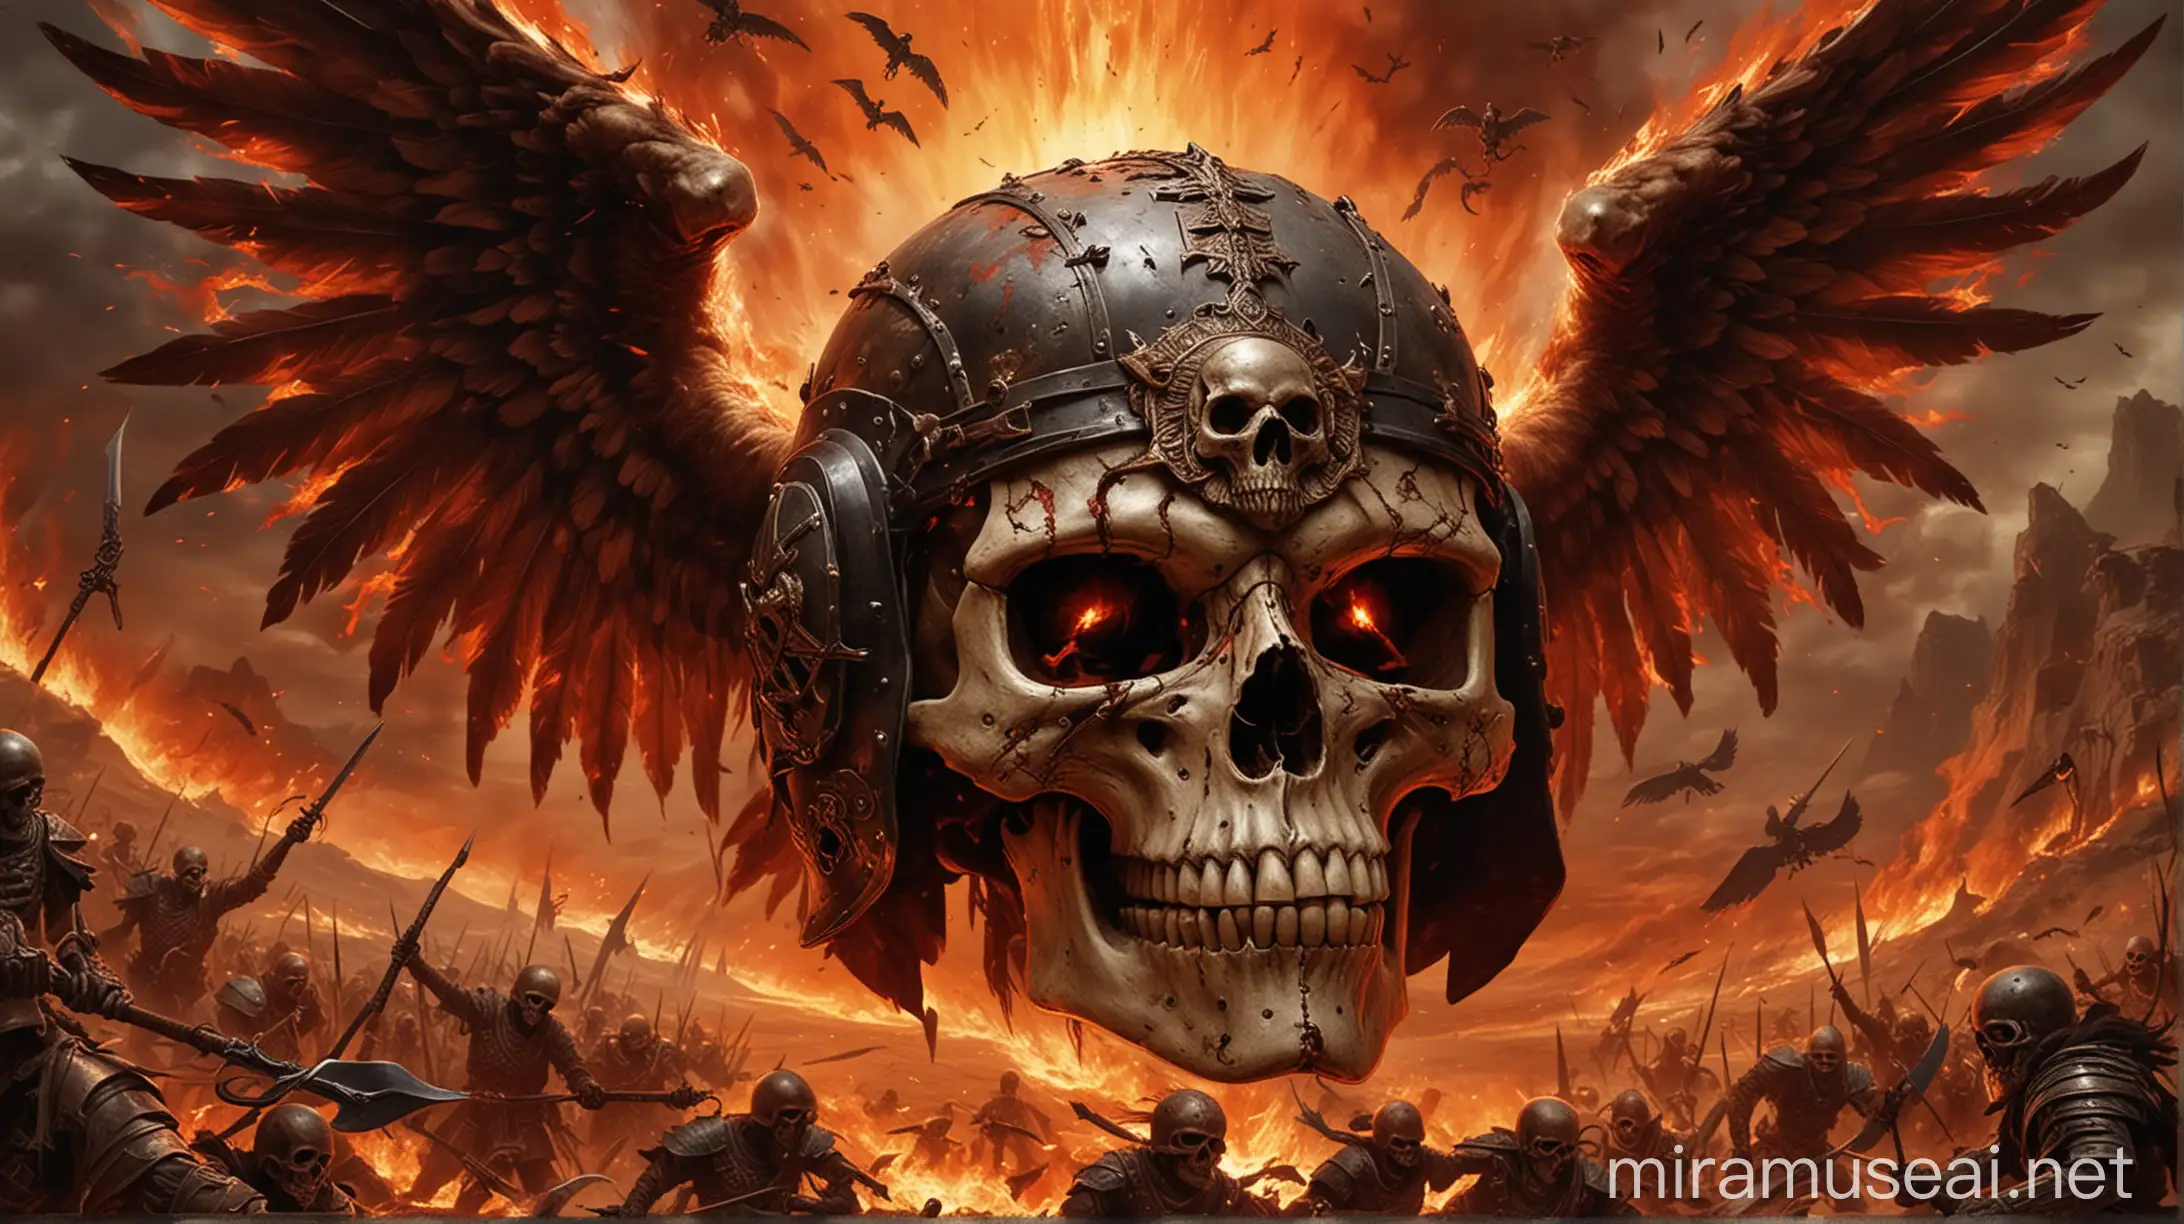 Winged Warrior with Skull Helmet in Apocalyptic Landscape